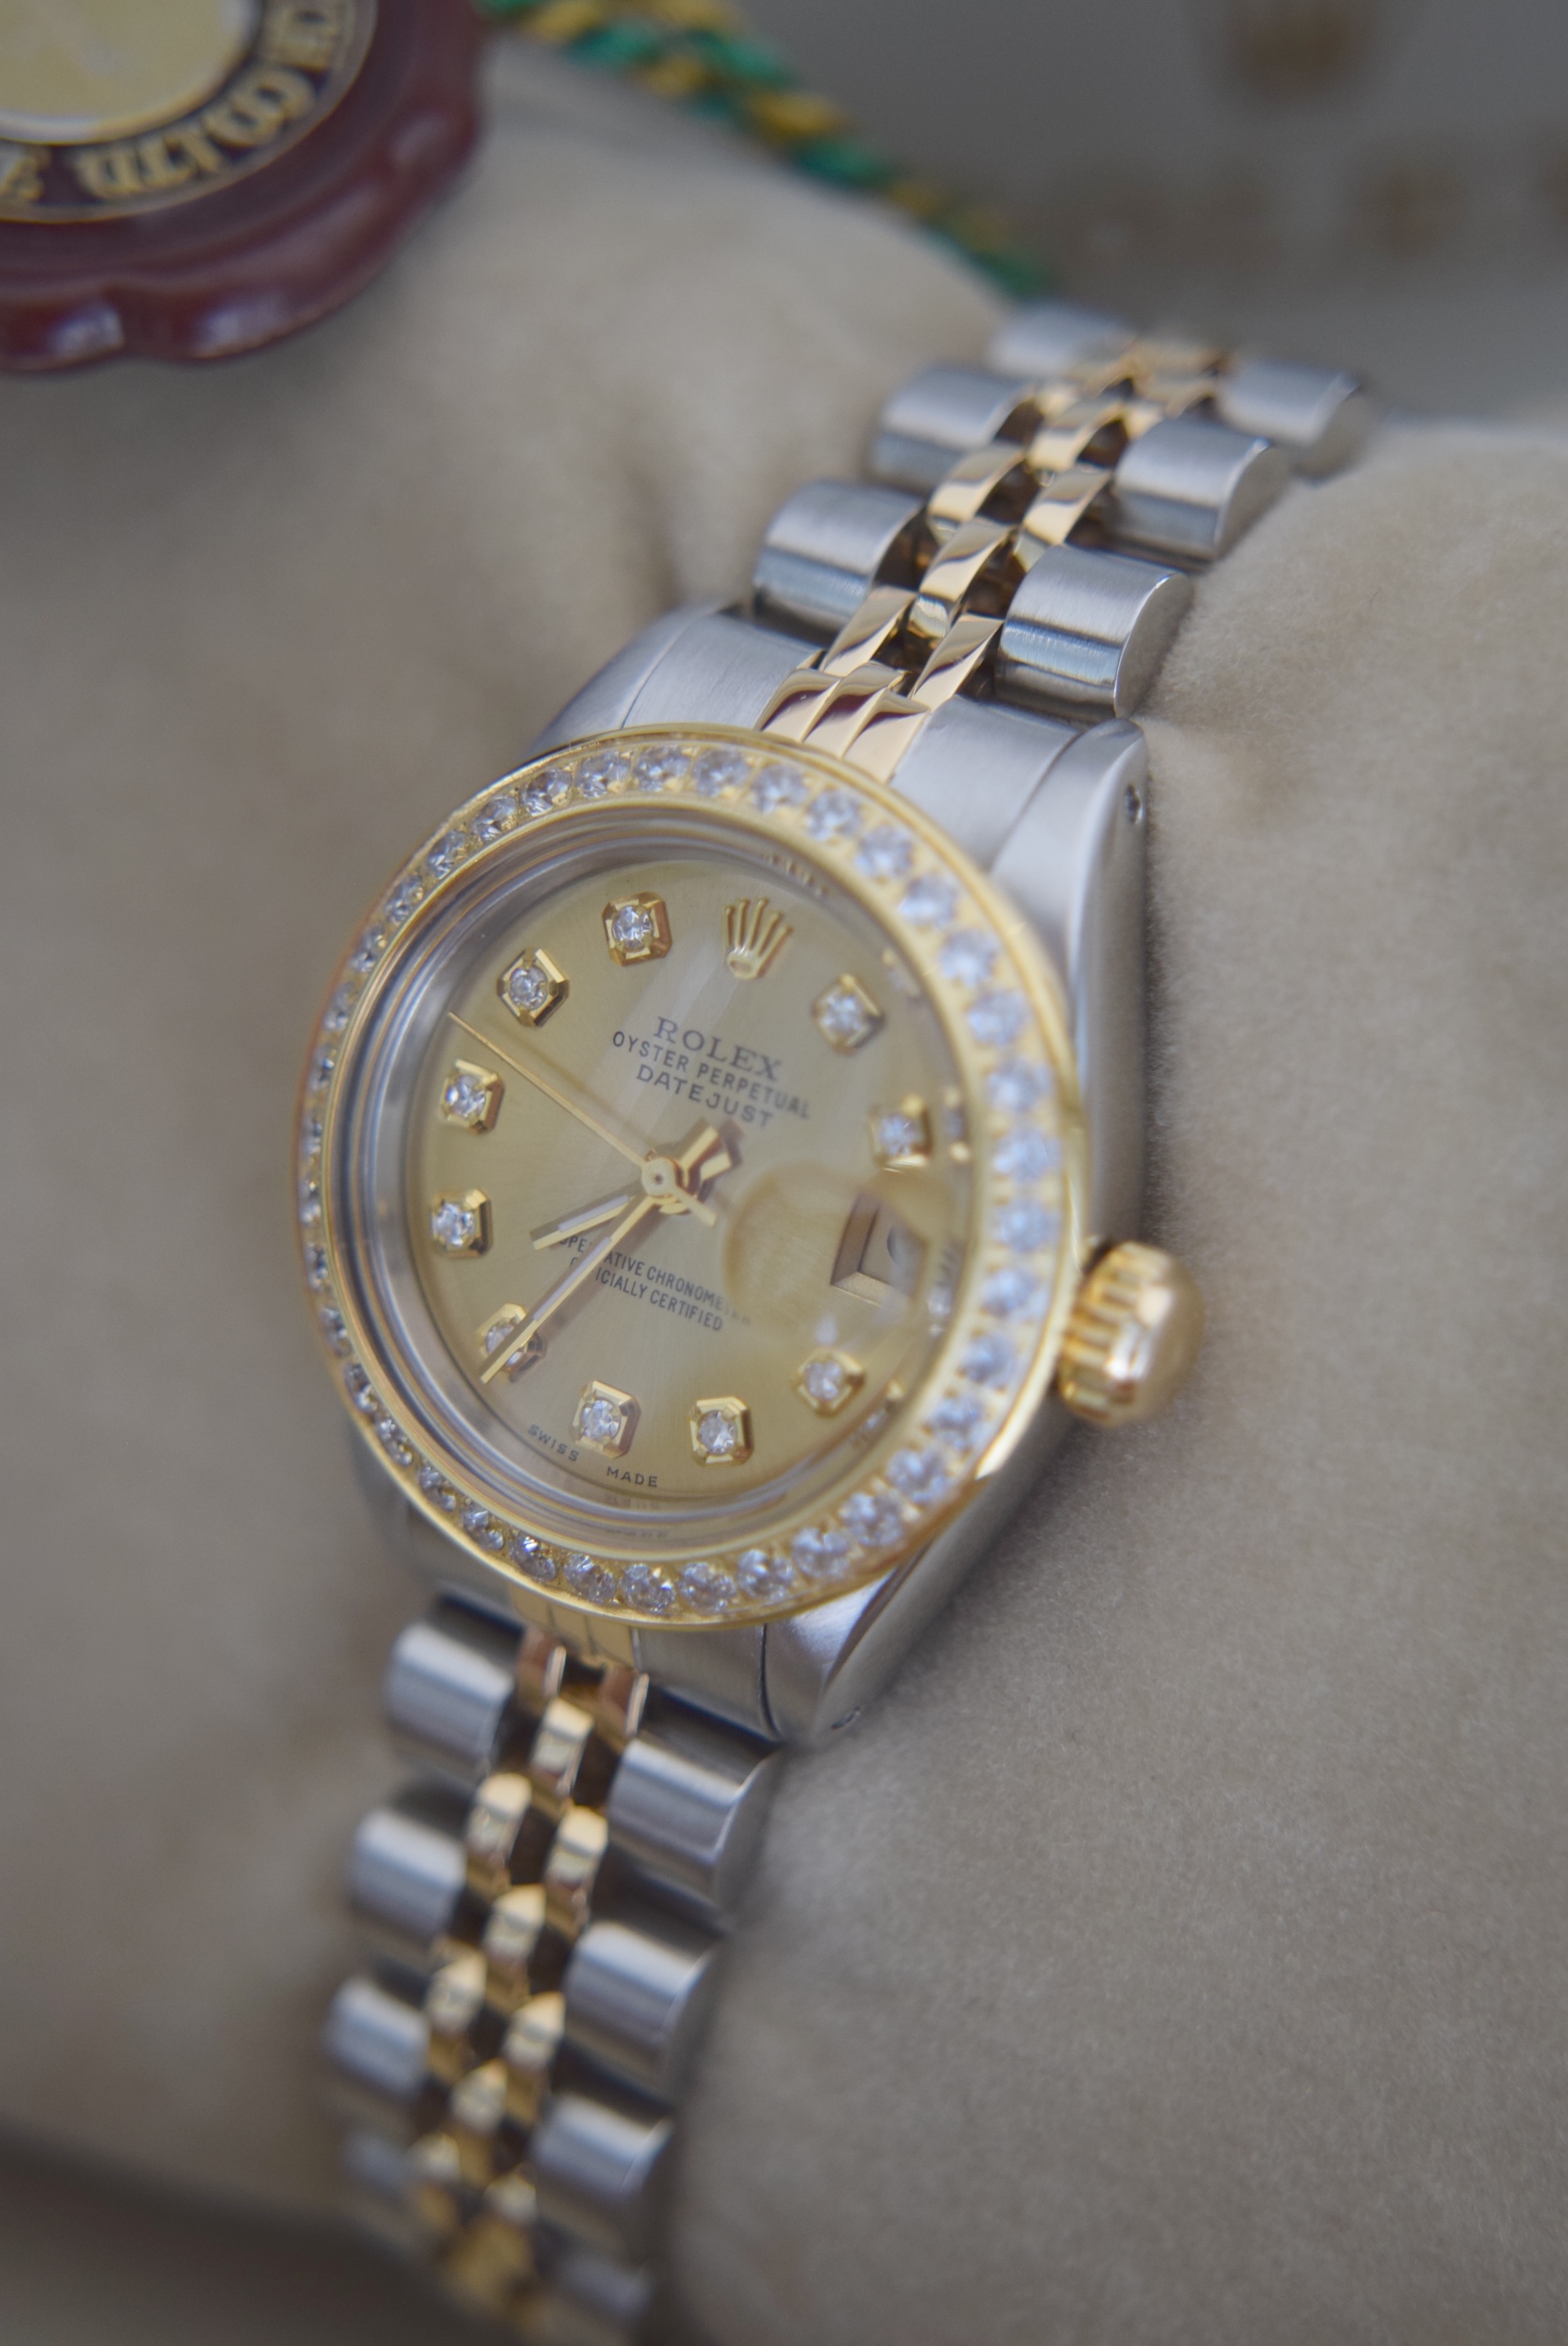 ROLEX 18CT YELLOW GOLD/ STEEL DATEJUST REF. 6917 - CUSTOM CHAMPAGNE DIAL/ BEZEL - Image 8 of 24